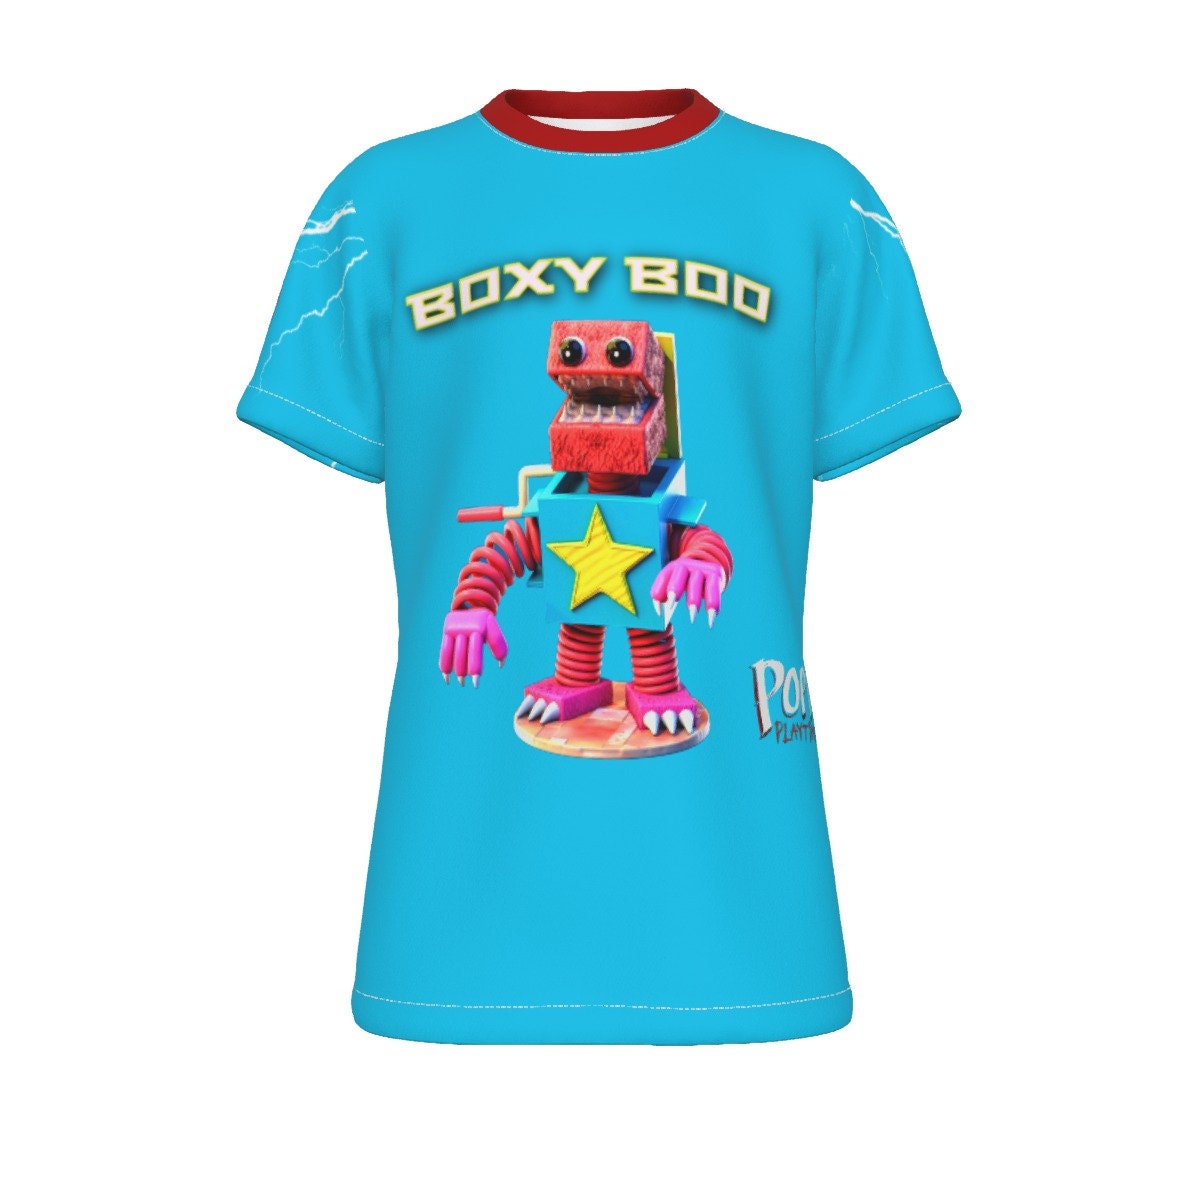 All Characters Of Roblox Doors Game Classic T-Shirt Unisex -  AnniversaryTrending